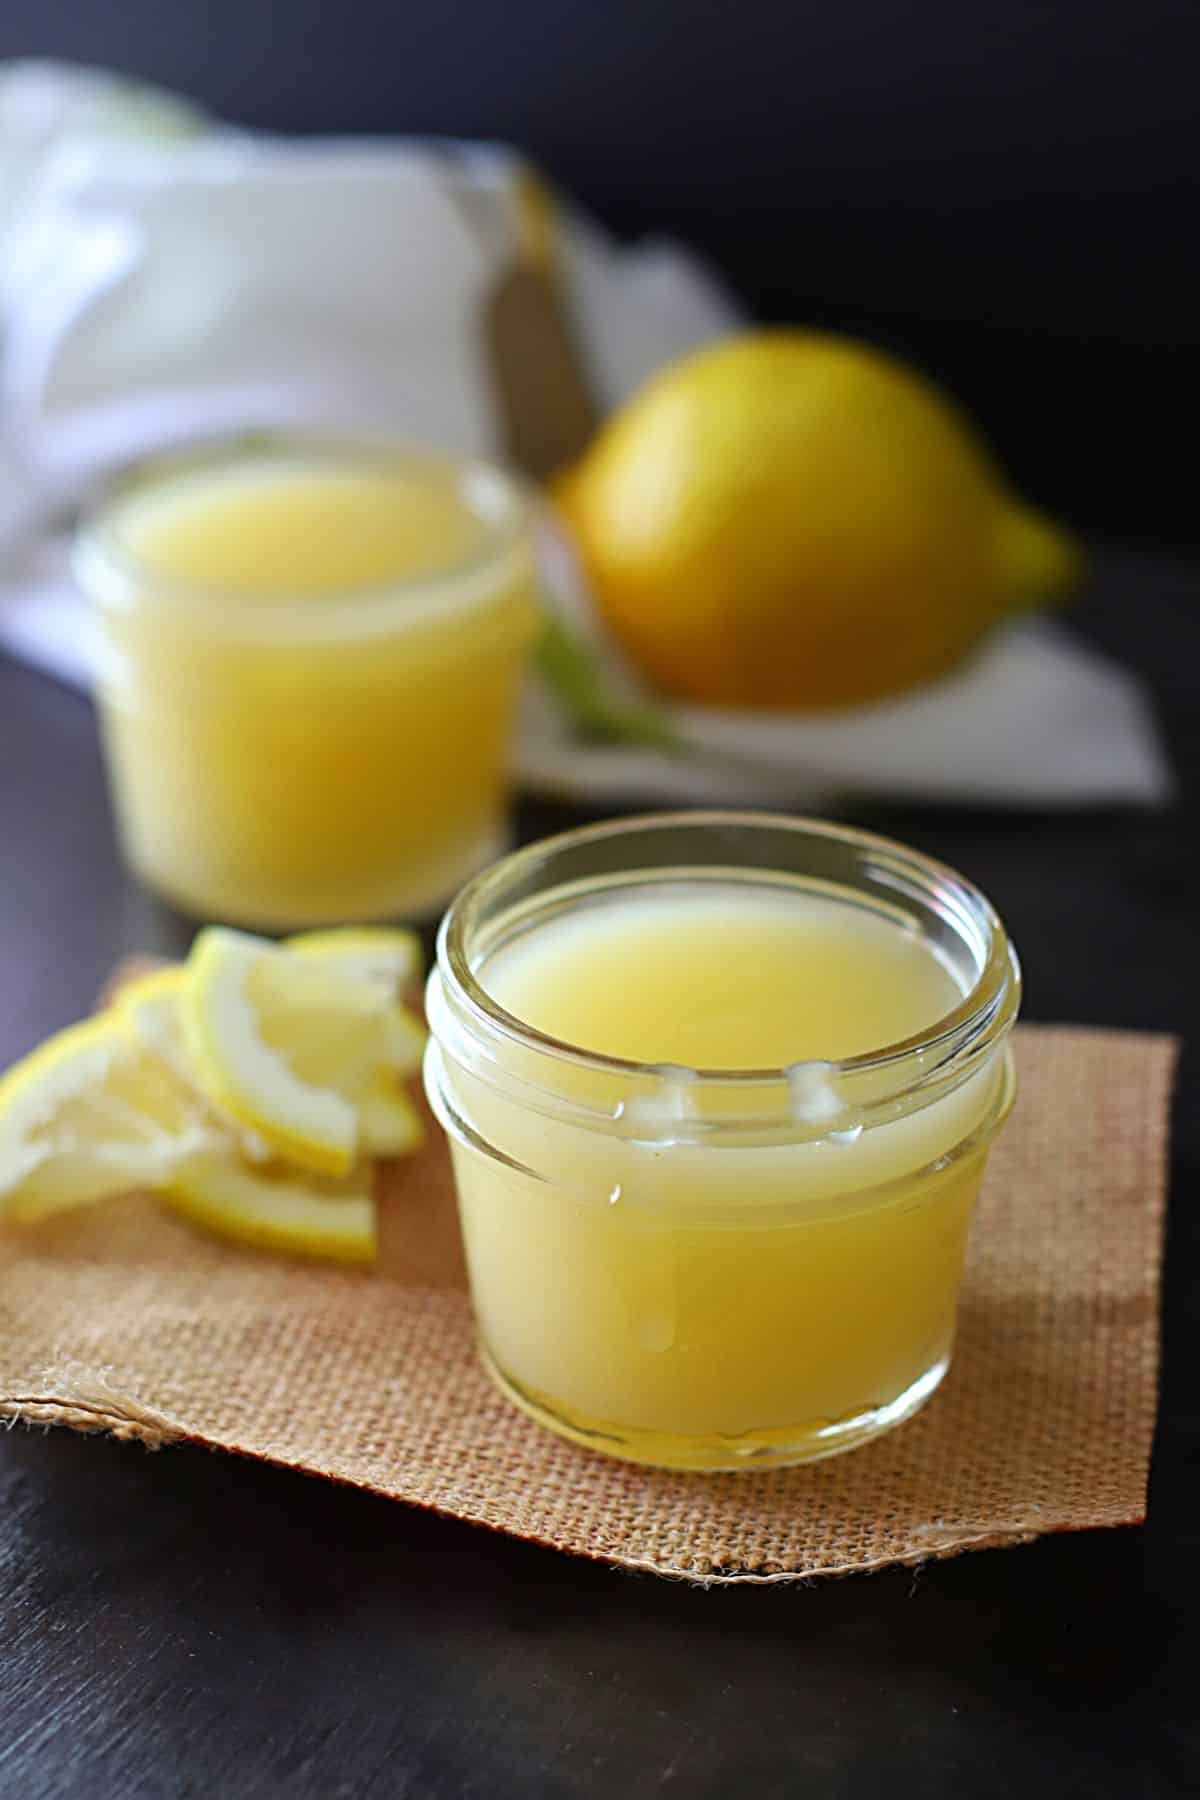 Small jars of easy lemon curds on a dark surface.